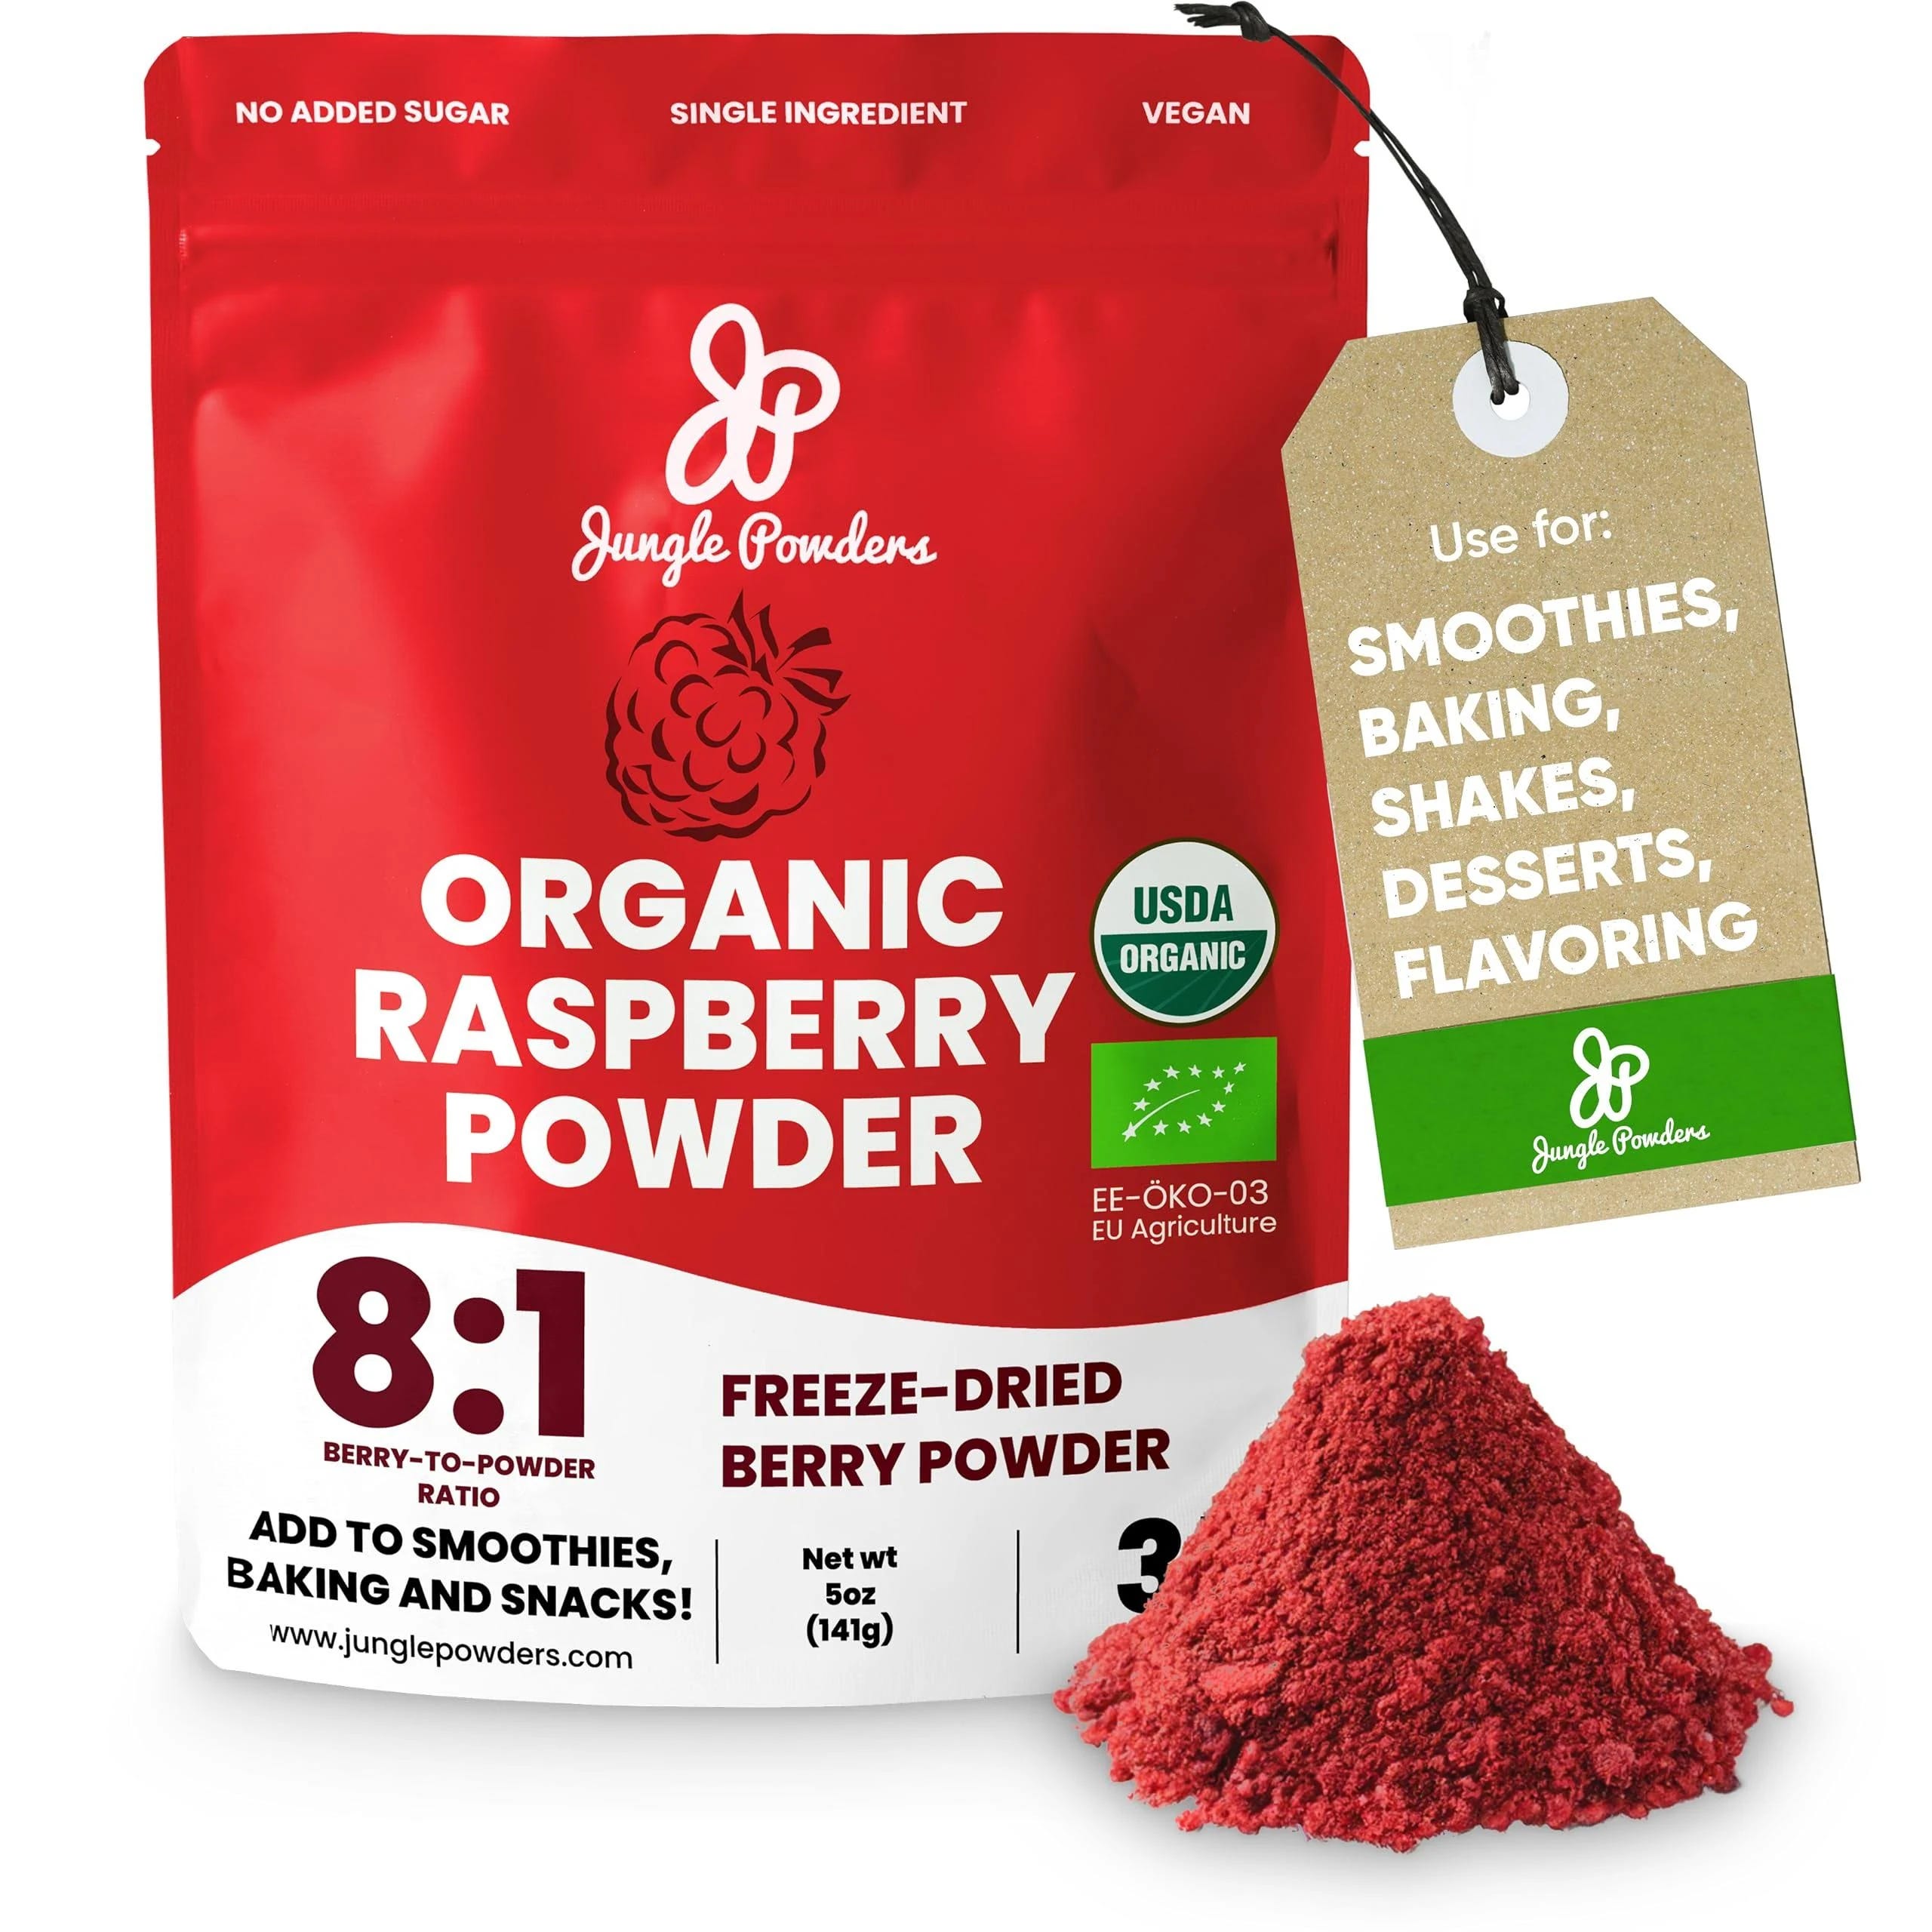 Organic Raspberry Powder for Healthy and Delicious Meals | Image